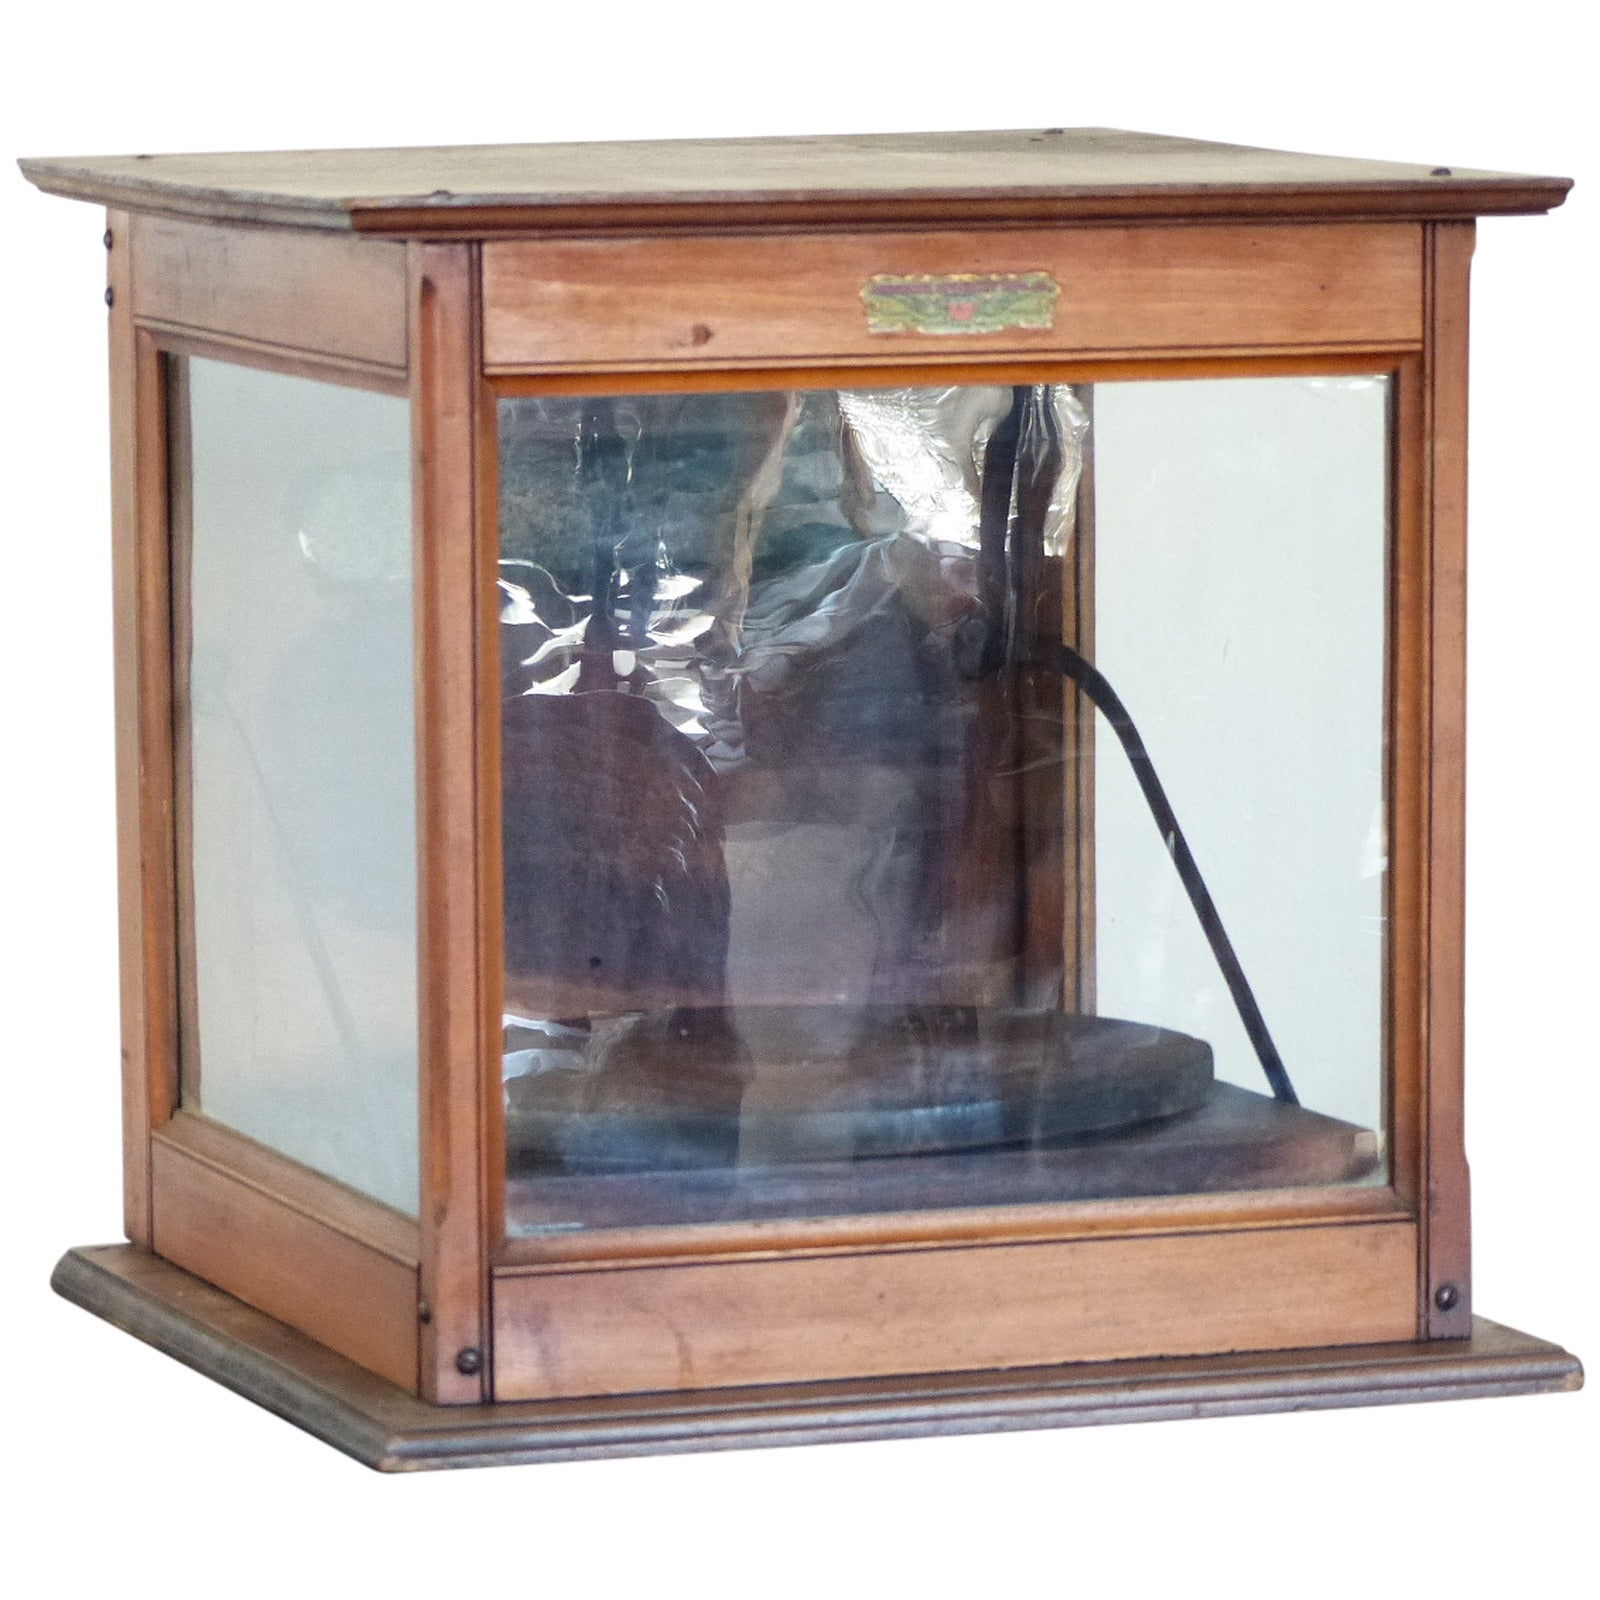 1930 Antique Merchantile store cheese cutter display cabinet